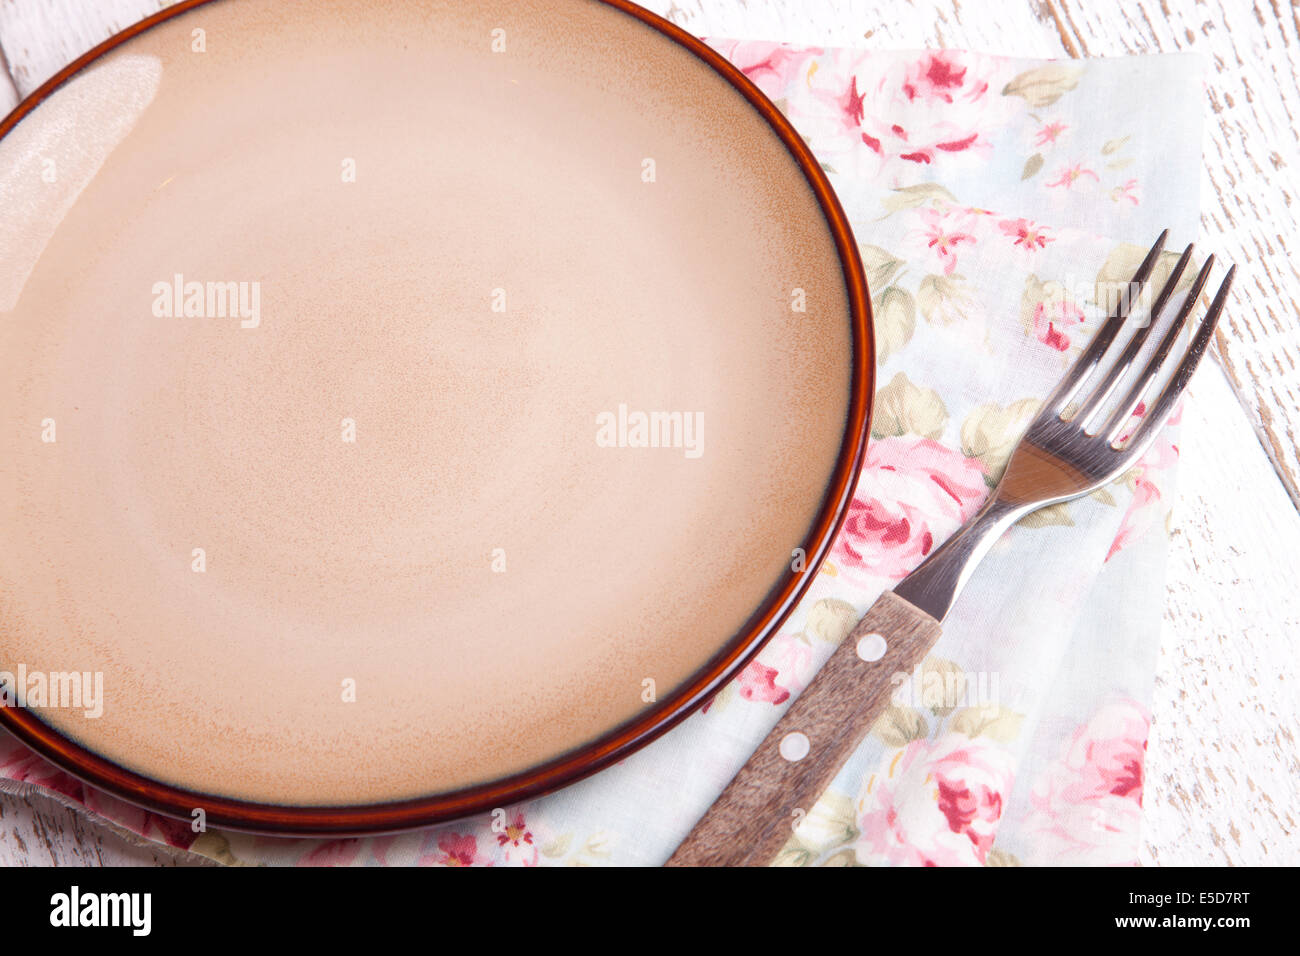 empty clay plate and fork on wooden table Stock Photo